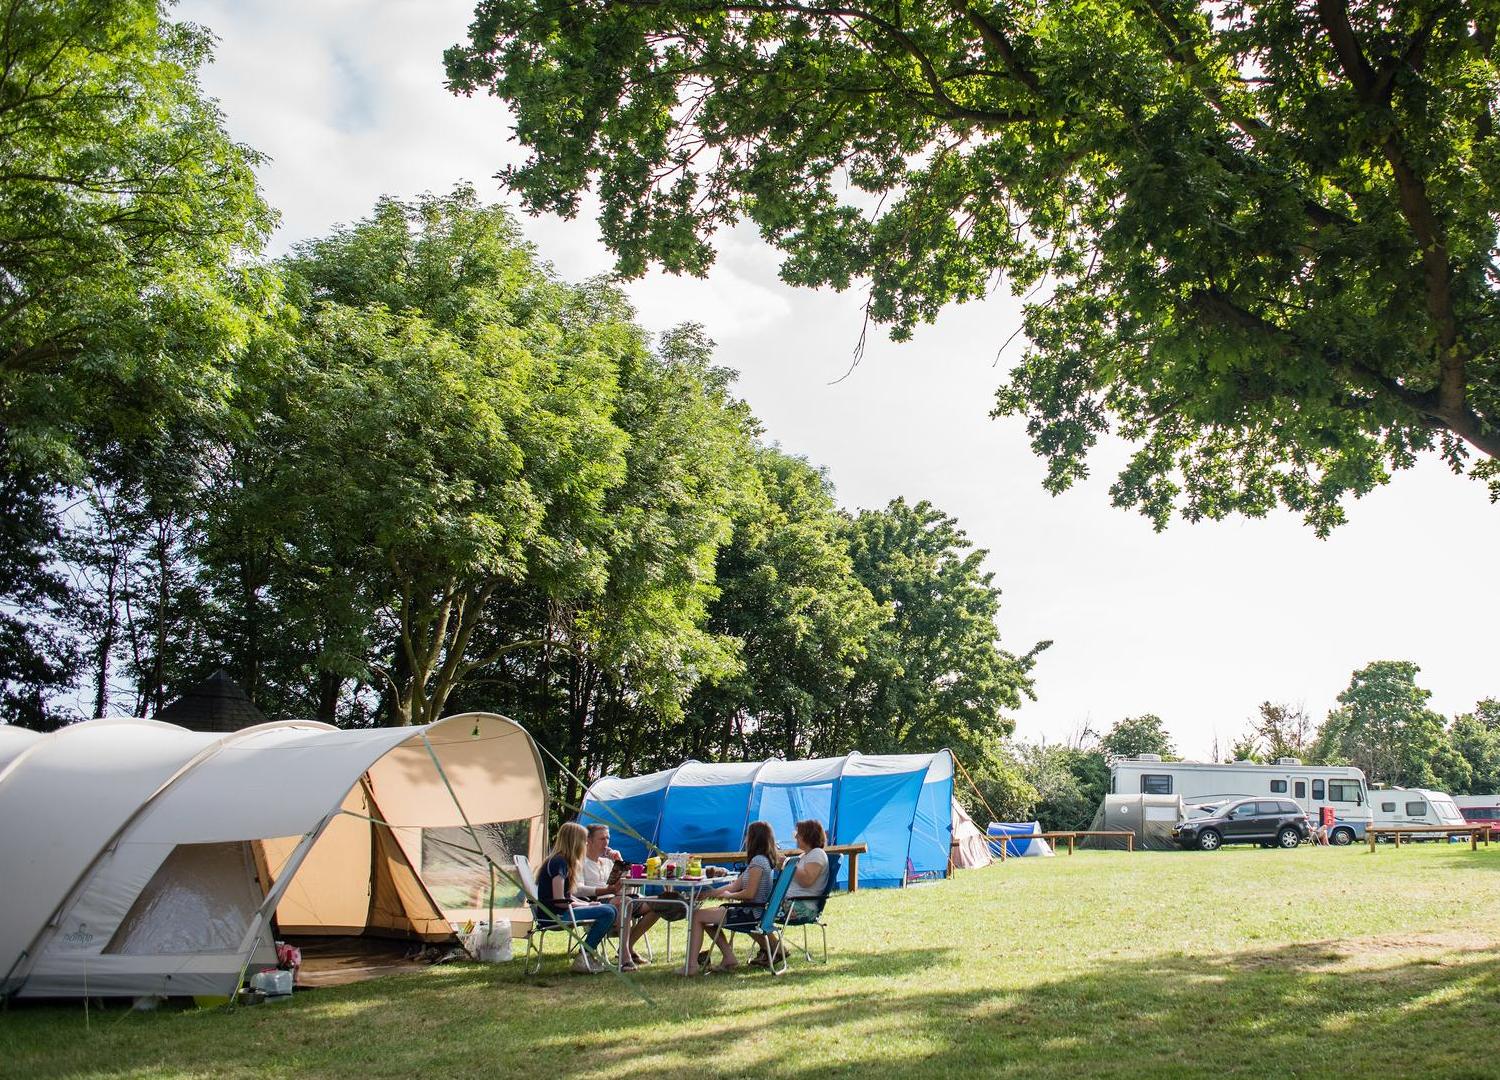 Large beige and blue tents pitched on a grass pitch with family sat outside one of the tents